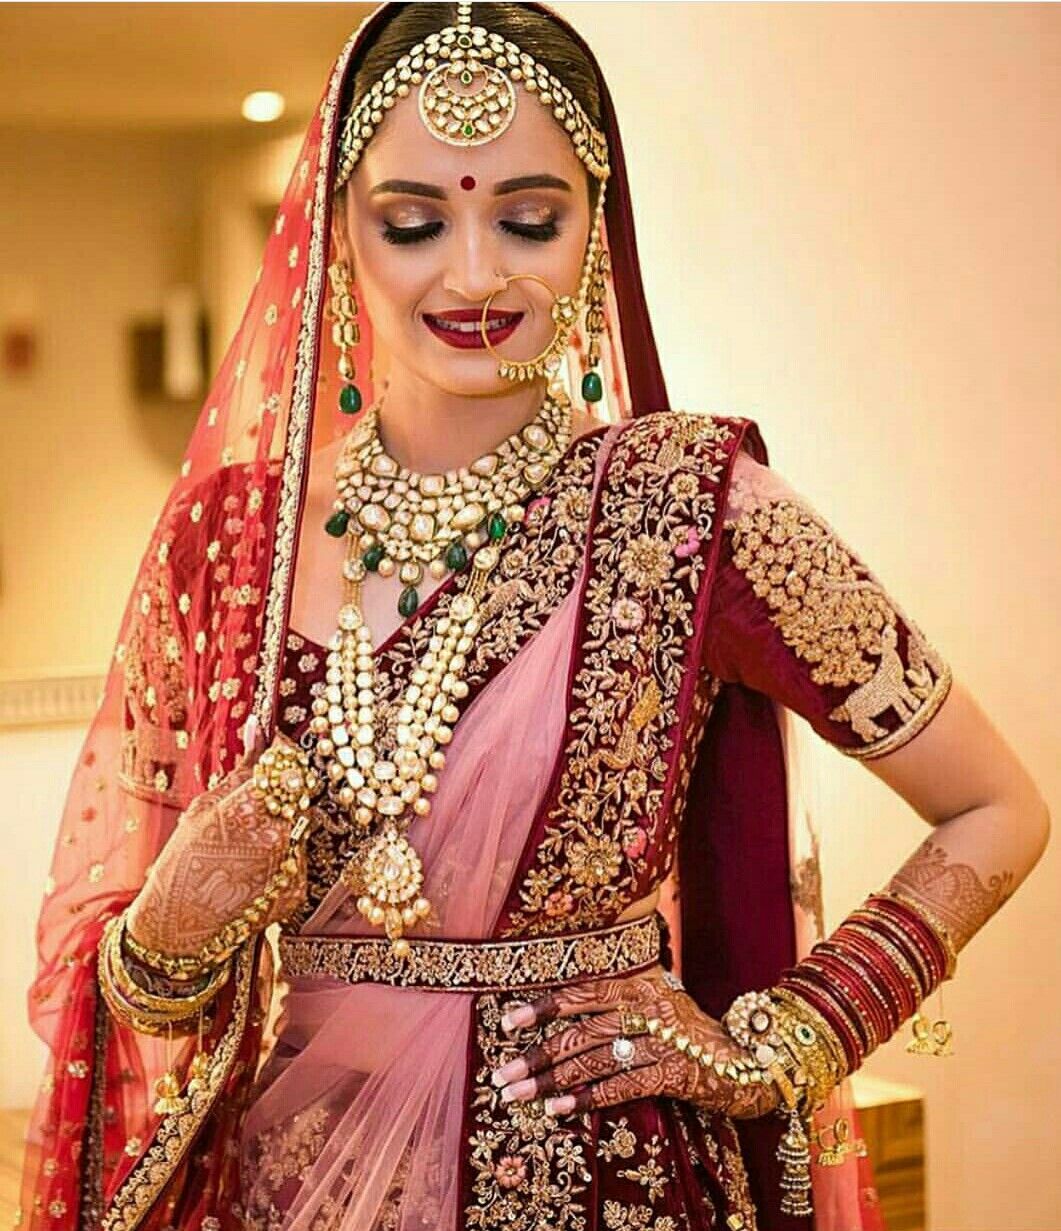 Bridal Make-up and Jewellery Ideas for Pink Lehengas